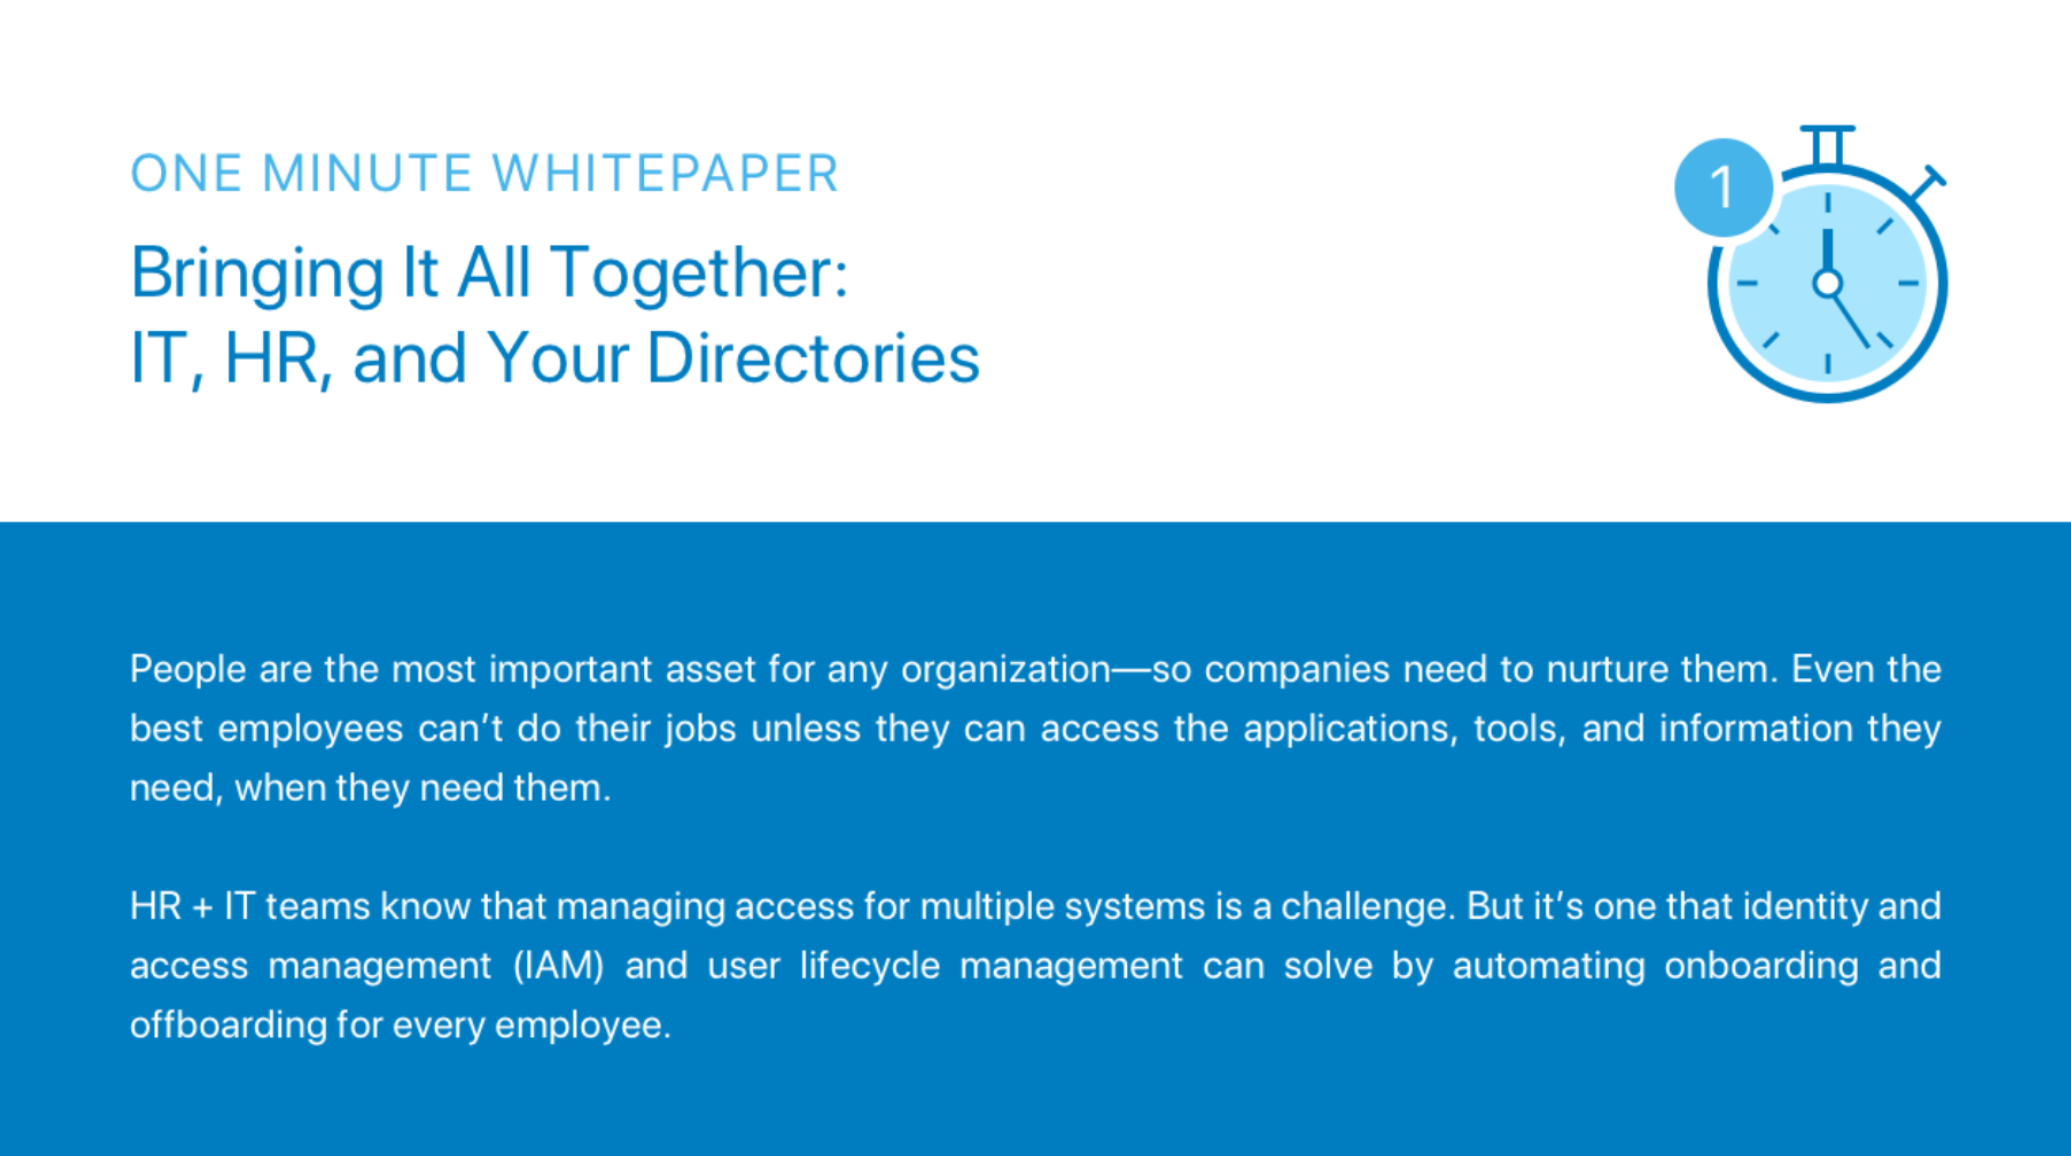 Bringing It All Together: IT, HR, and Your Directories.